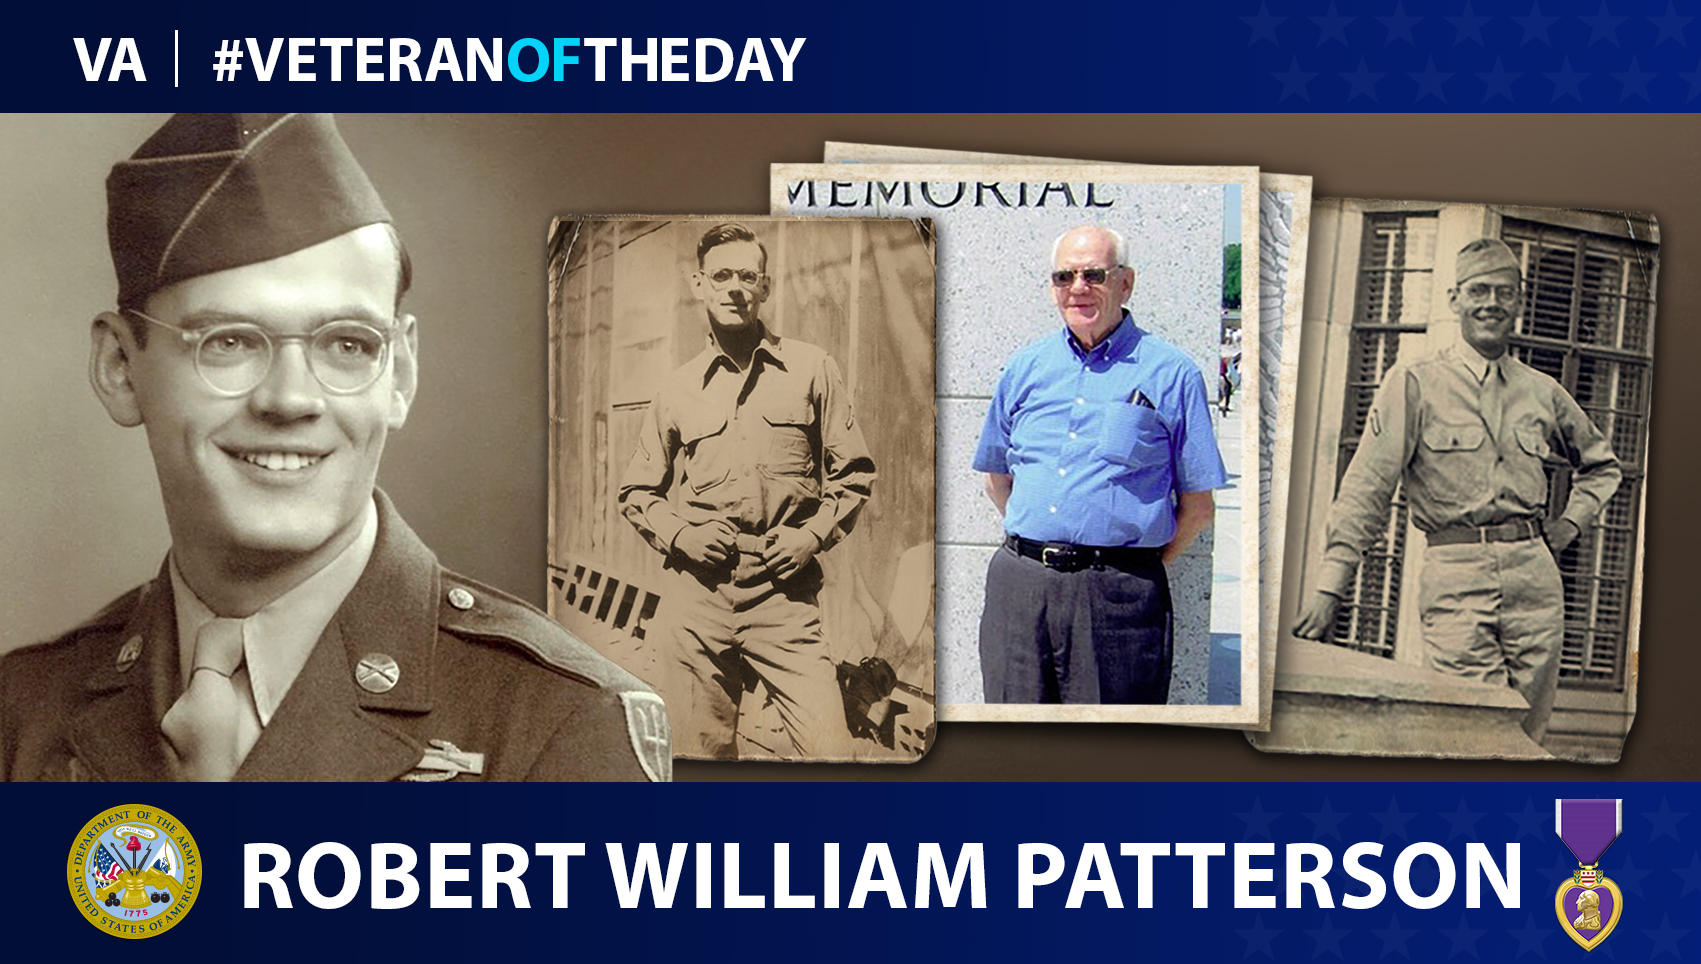 Army Veteran Robert William Patterson is today’s Veteran of the Day.